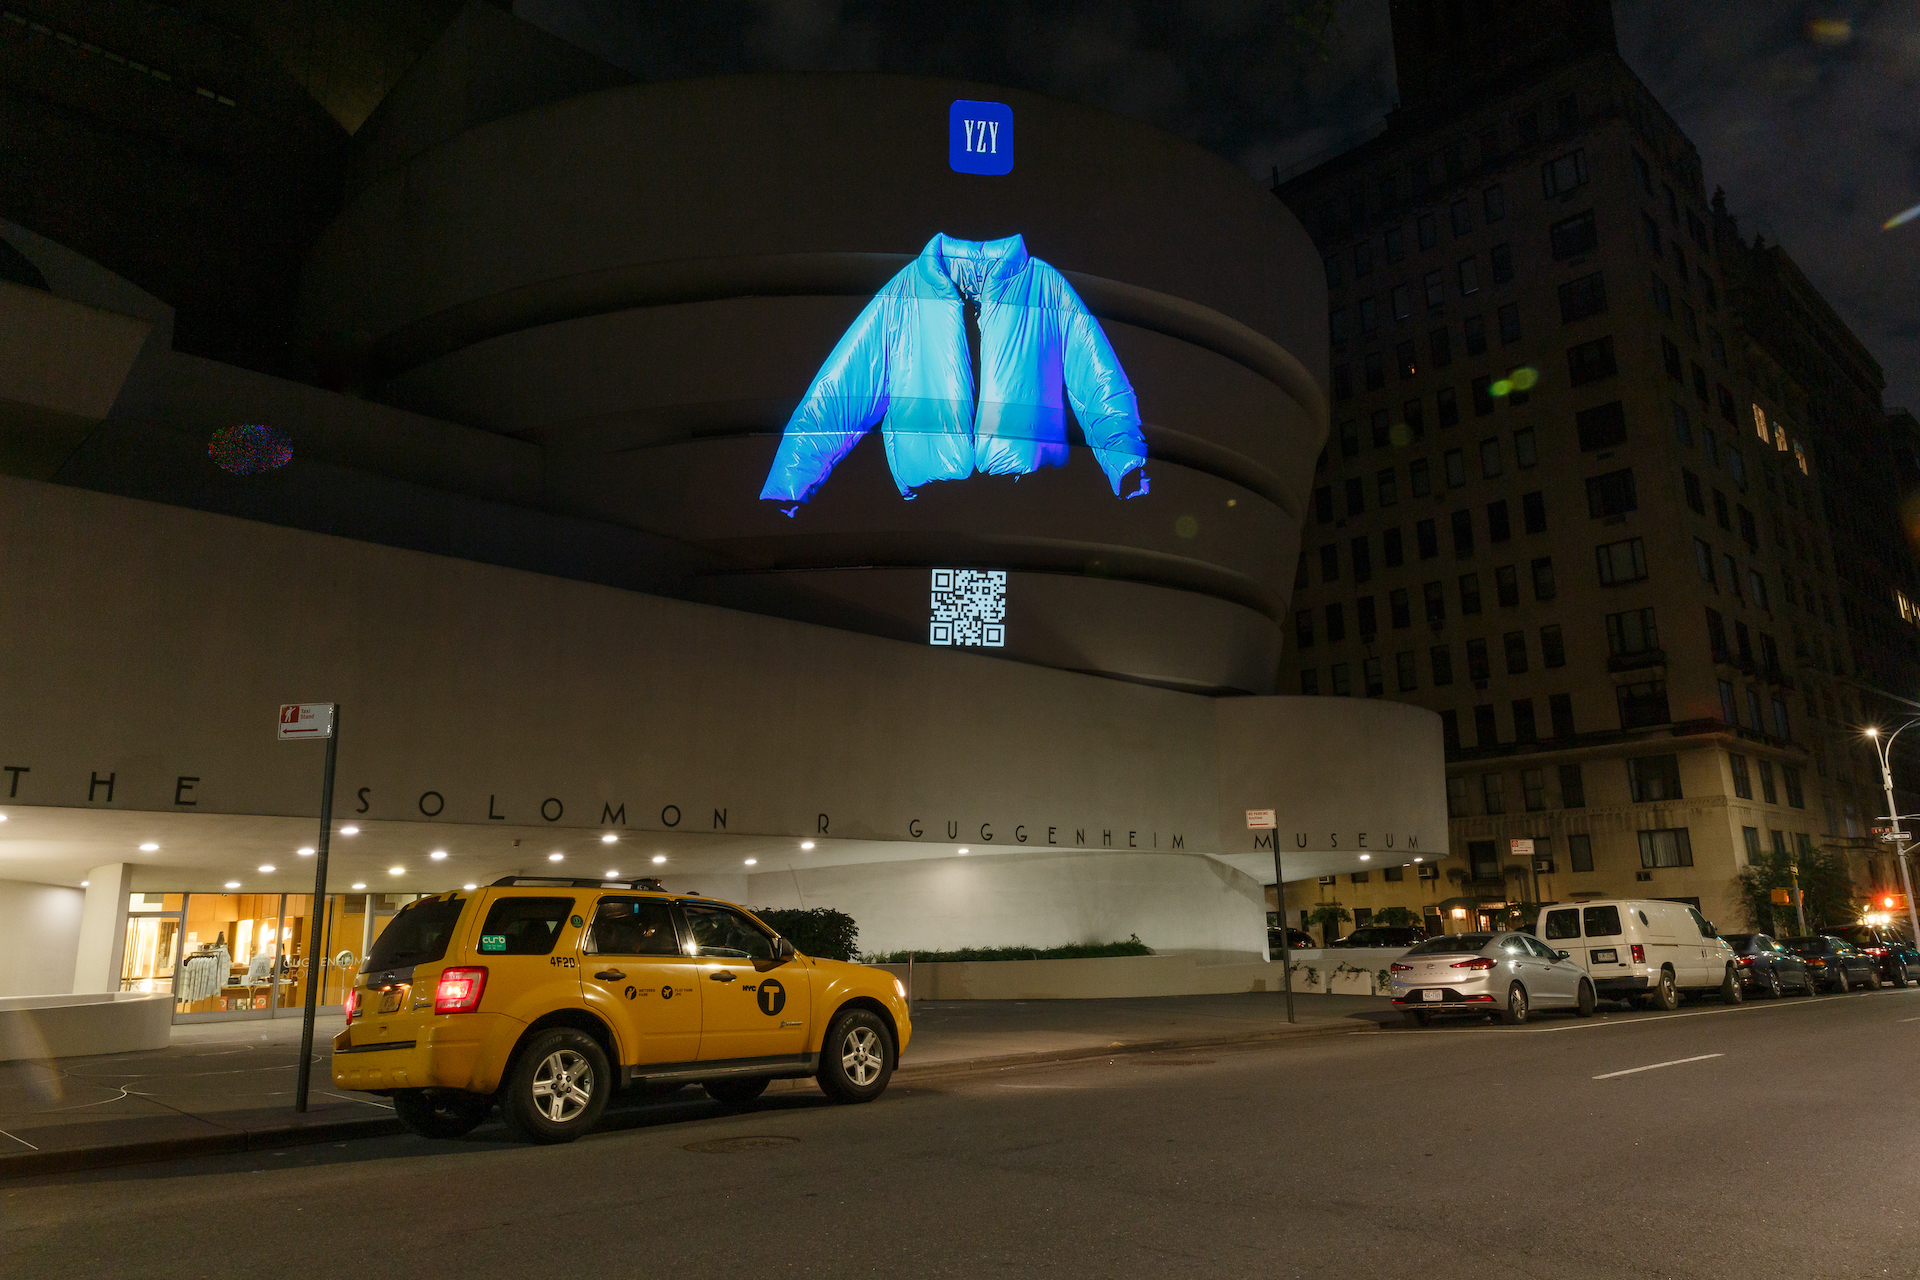 Yeezy Gap Projection Campaign 2021 New York City Guggenheim Museum